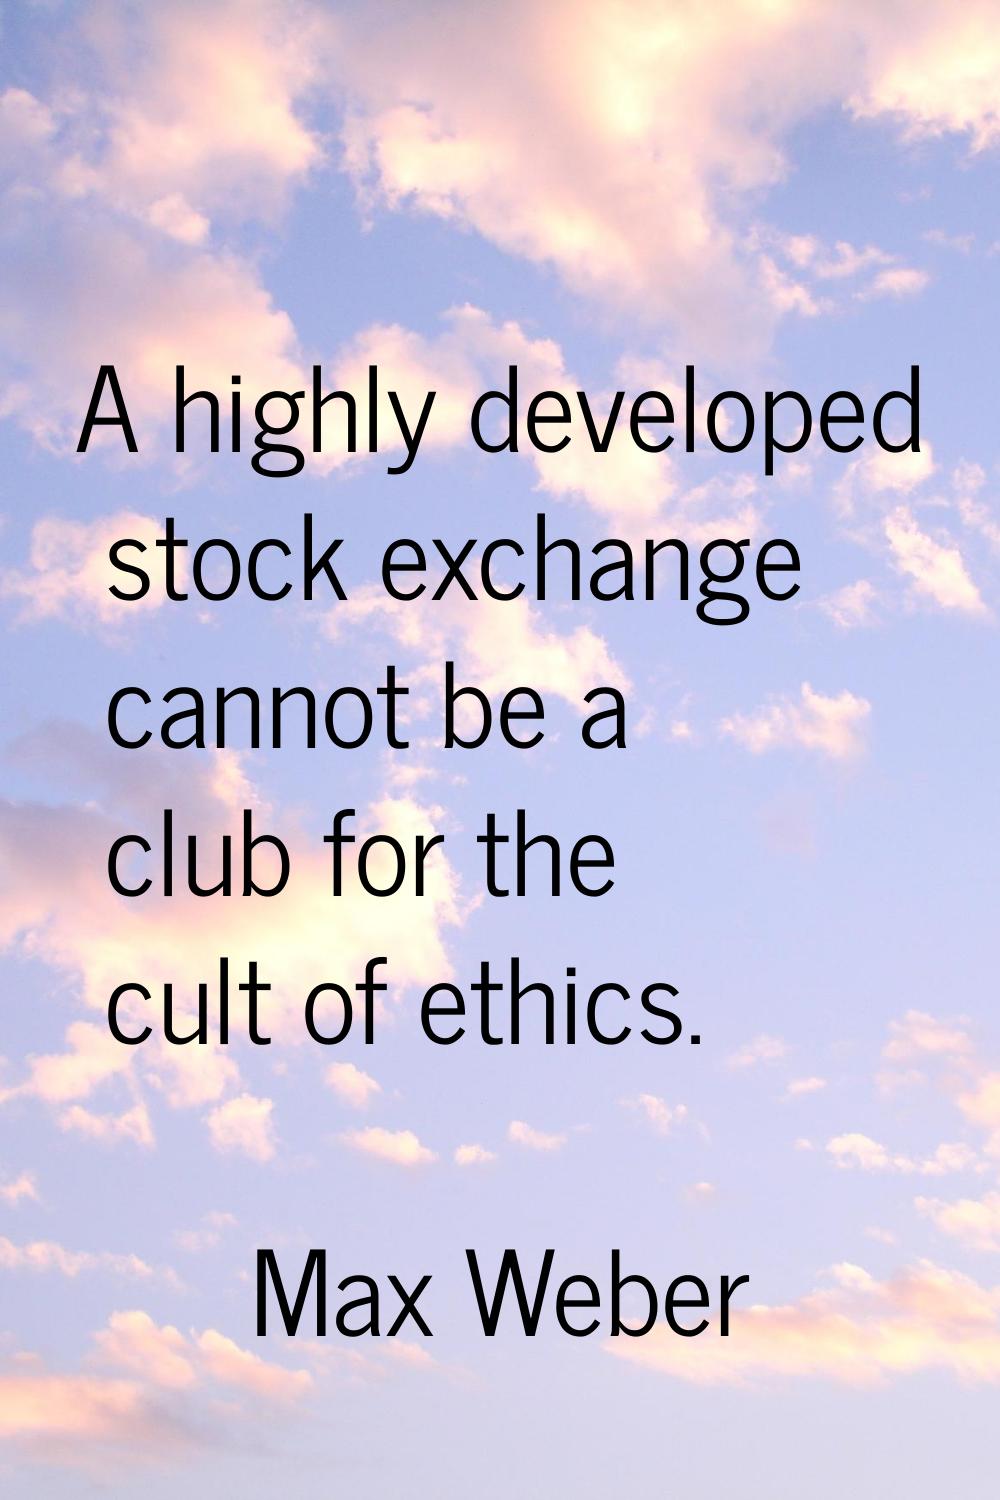 A highly developed stock exchange cannot be a club for the cult of ethics.